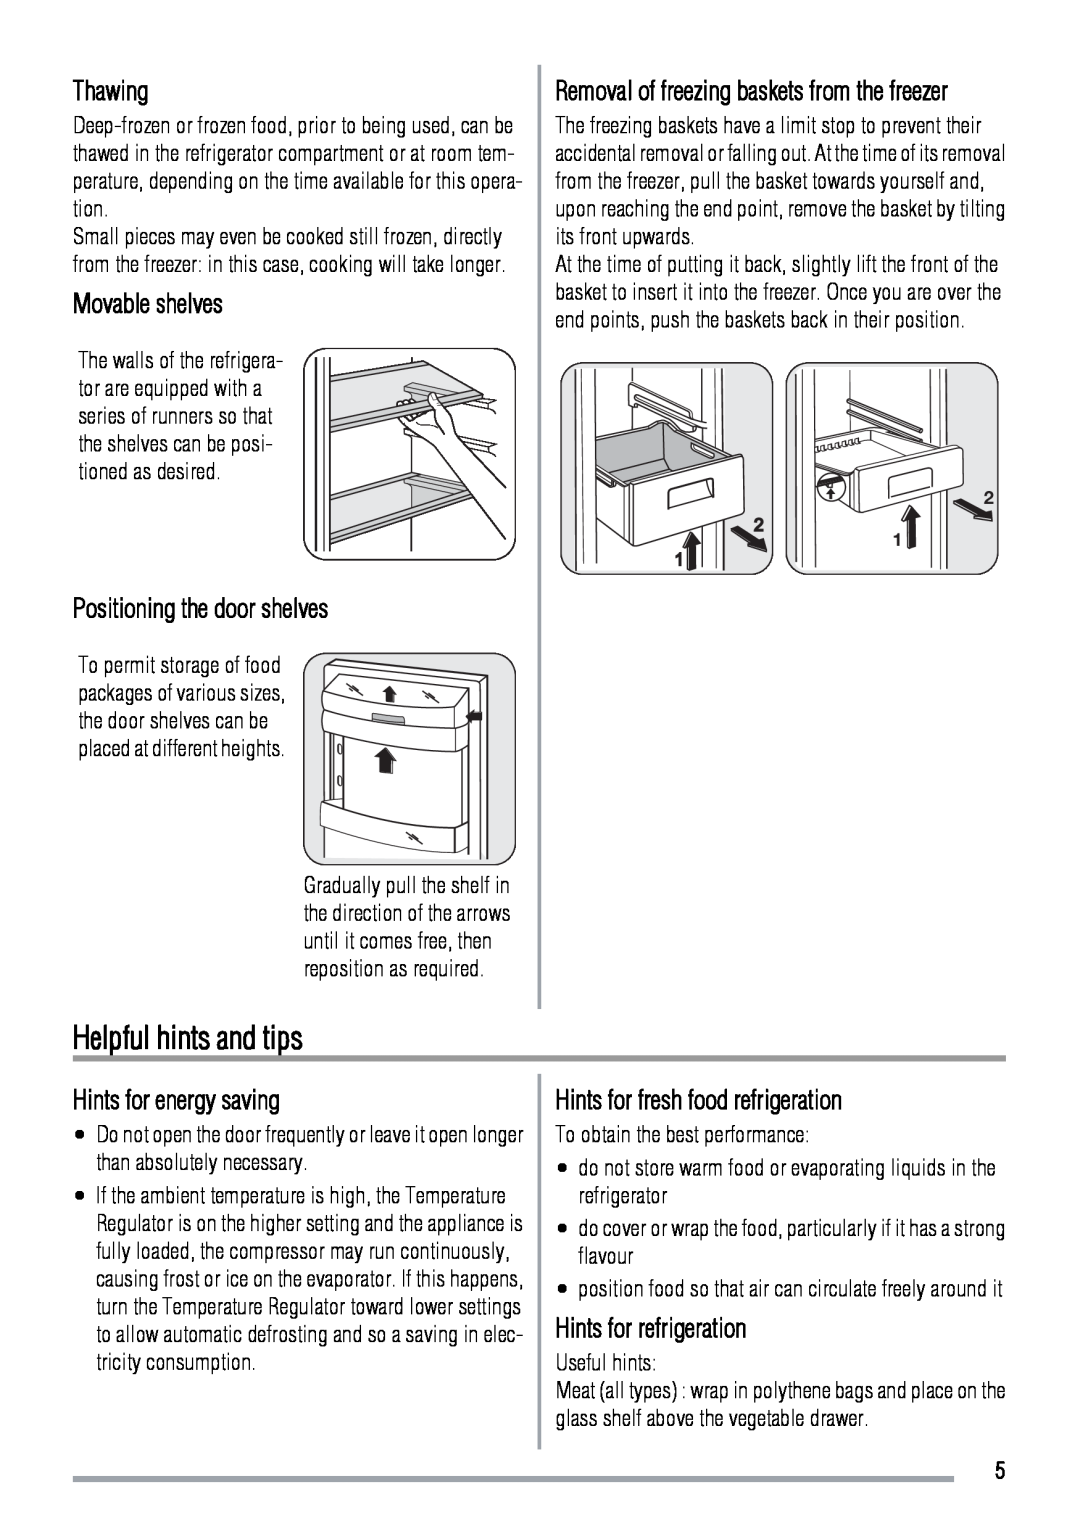 Zanussi ZRB638FW Helpful hints and tips, Thawing, Movable shelves, Positioning the door shelves, Hints for energy saving 